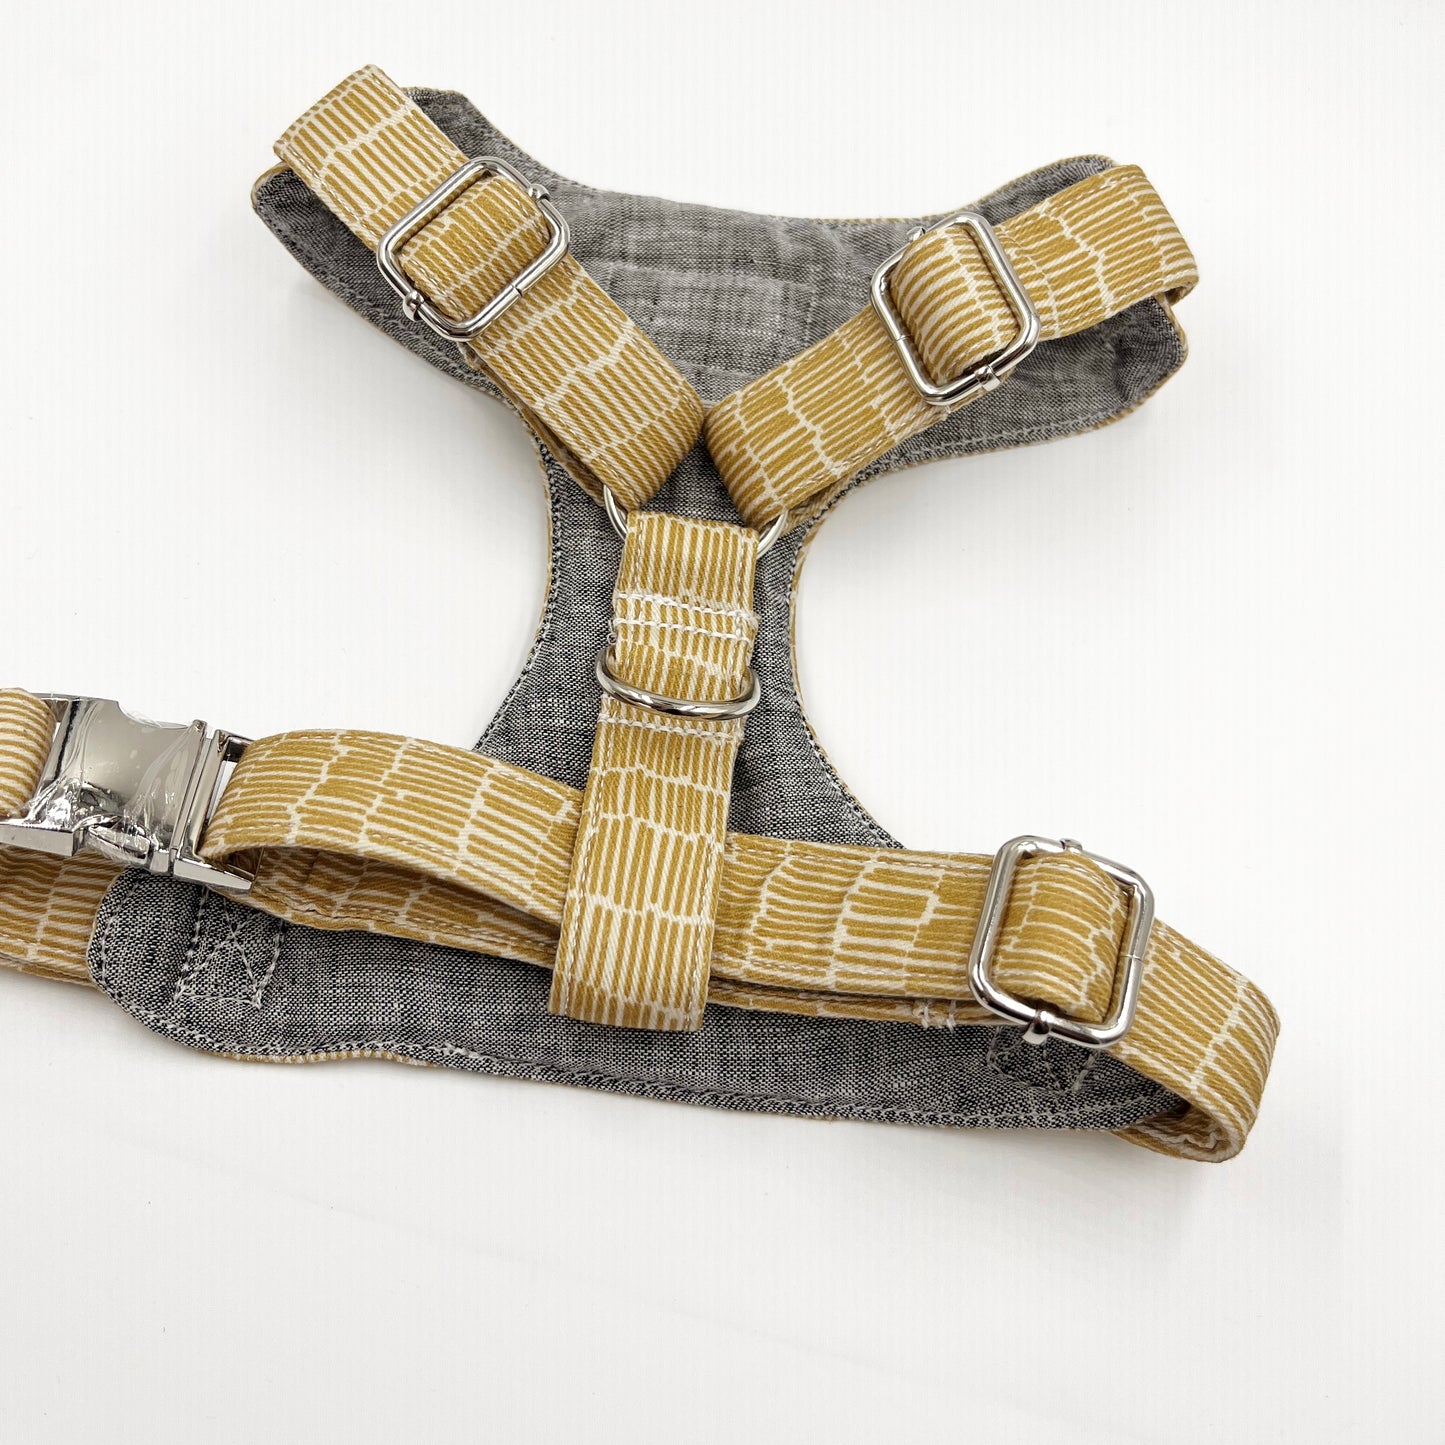 The 'Andie' Chest Harness